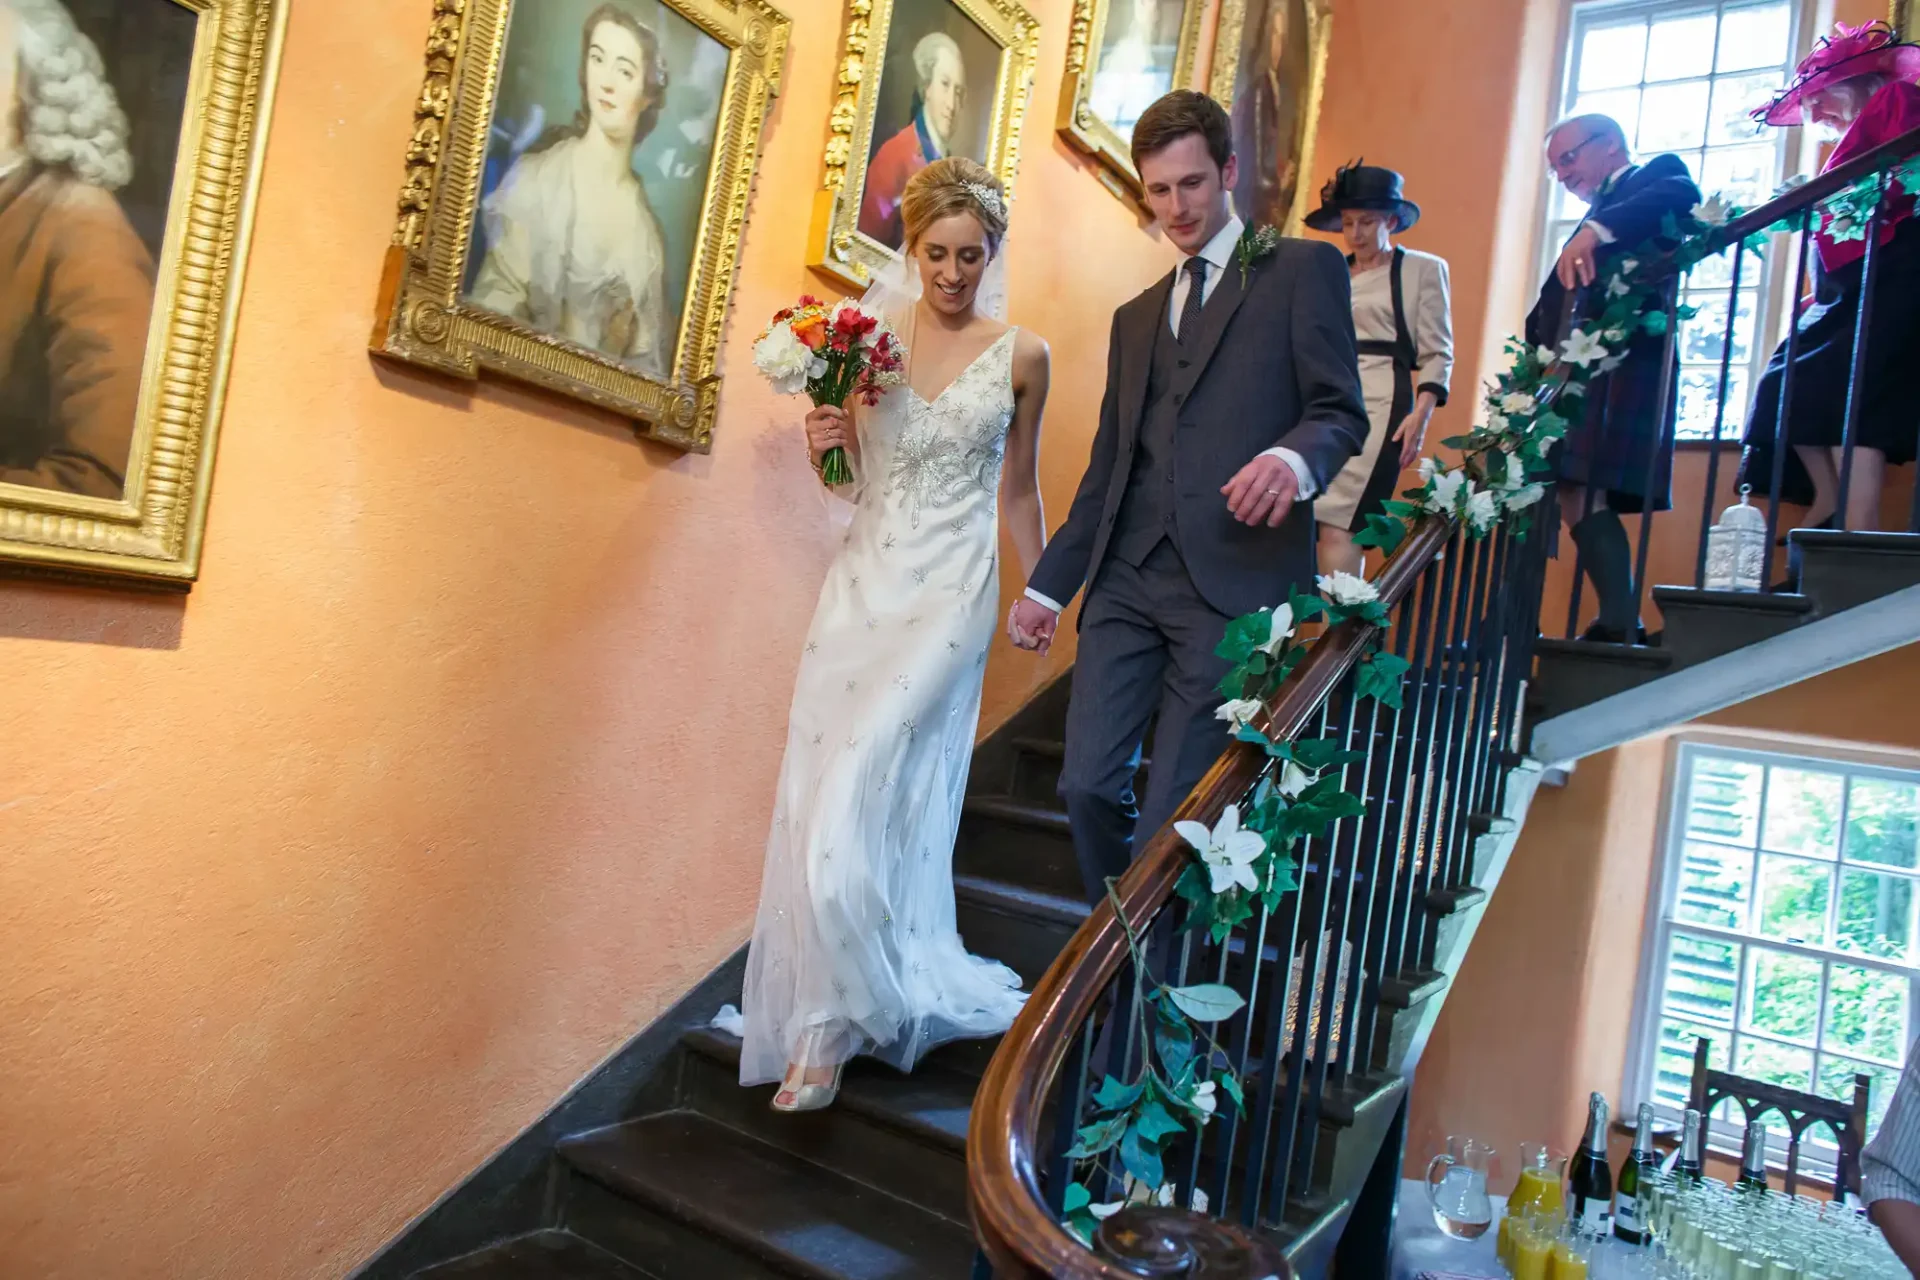 A bride and groom descend a staircase holding hands, surrounded by guests and paintings on the wall, during a wedding celebration.